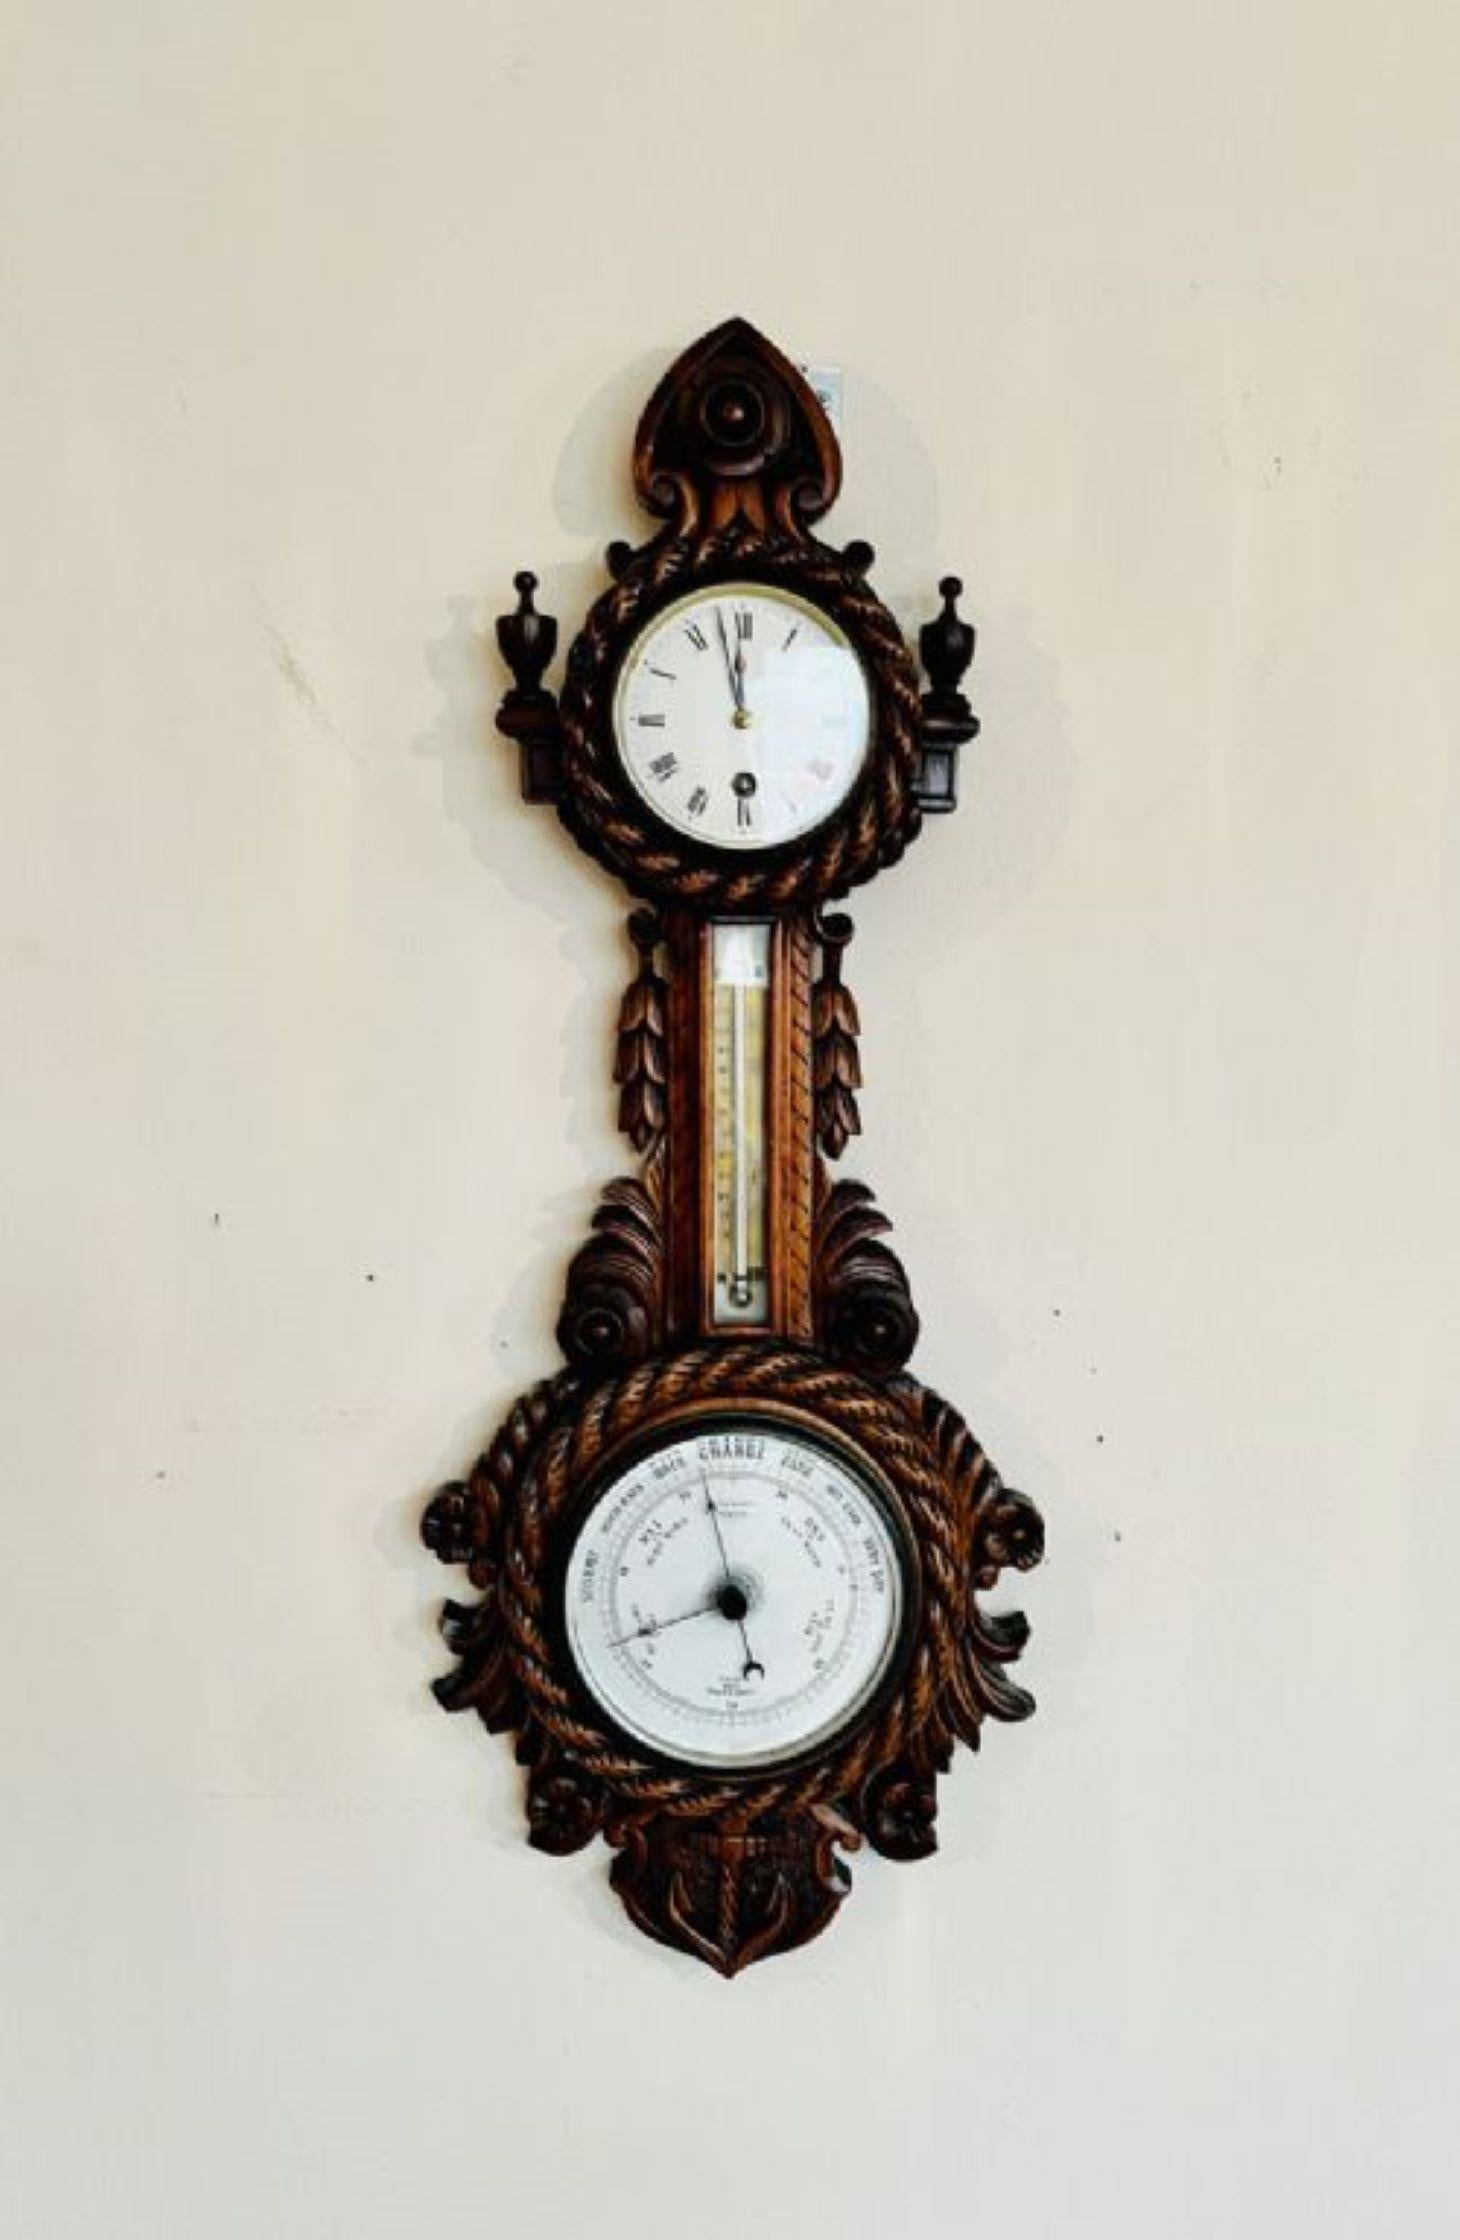 Quality antique Victorian carved walnut banjo clock barometer having a quality carved walnut barometer with a quality carved walnut case having carved rope twists around the porcelain dials and an anchor to the bottom with a clock to the top of the